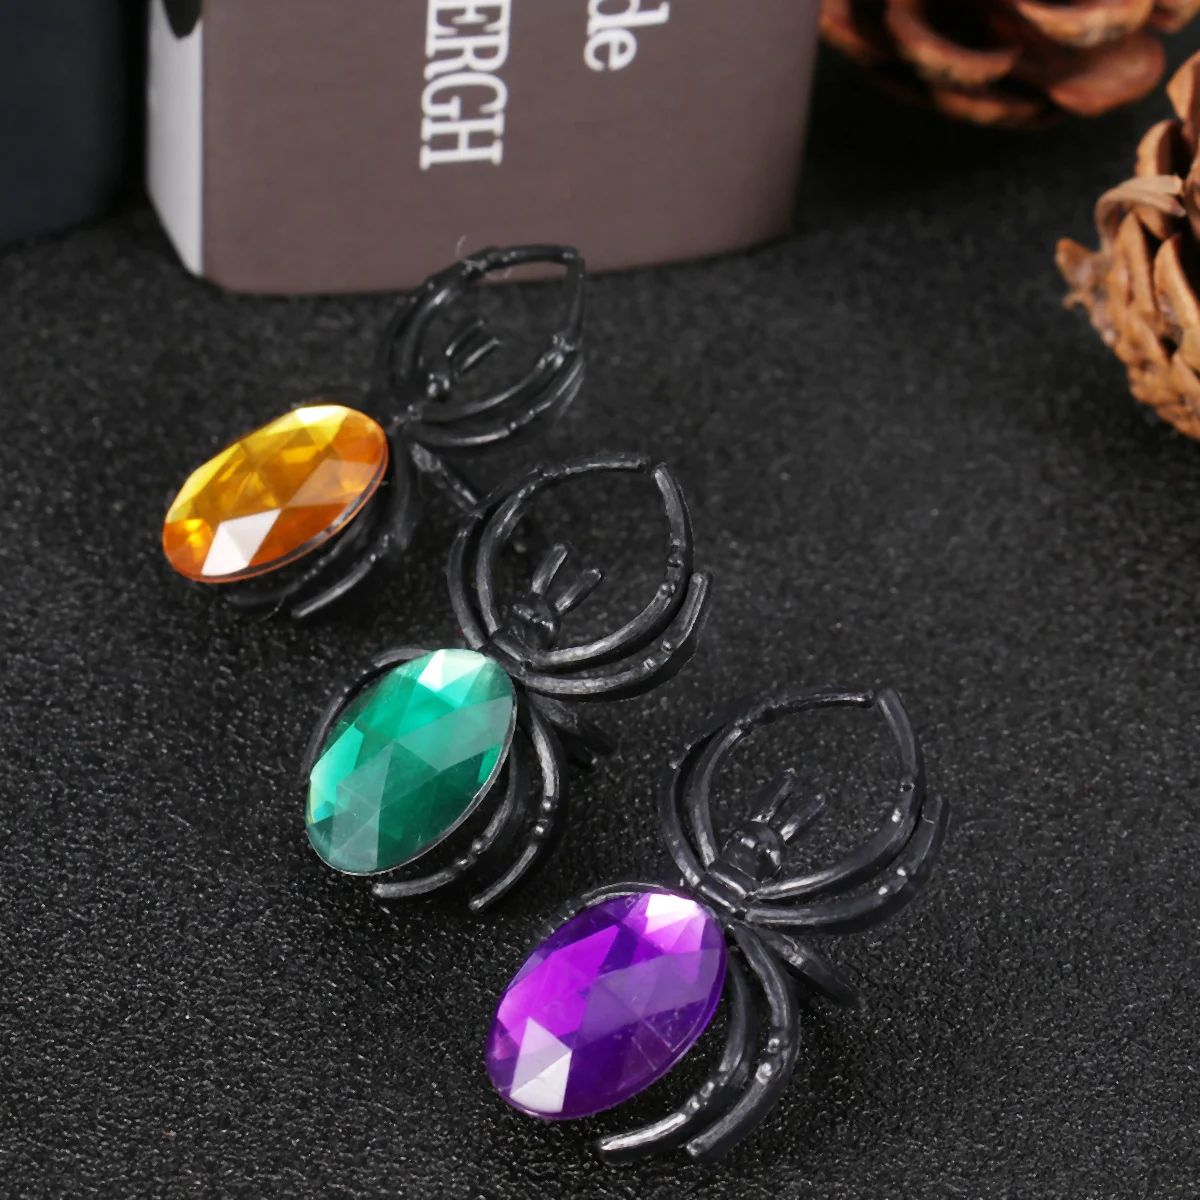 

25pcs Spider Rings, Spider Ring Finger Ring Toys Ring Spider Party Favors for Kids Trick or Treat Favor Fancy items girls